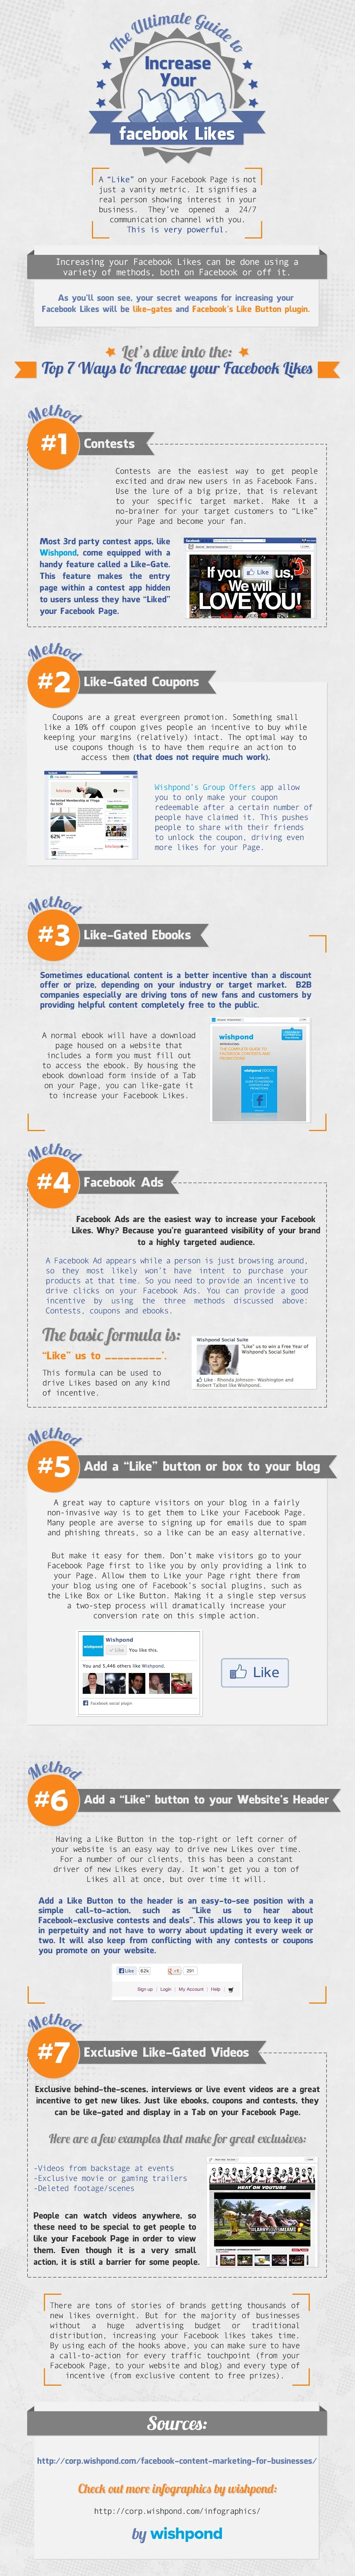 Increase Facebook Likes Infographic